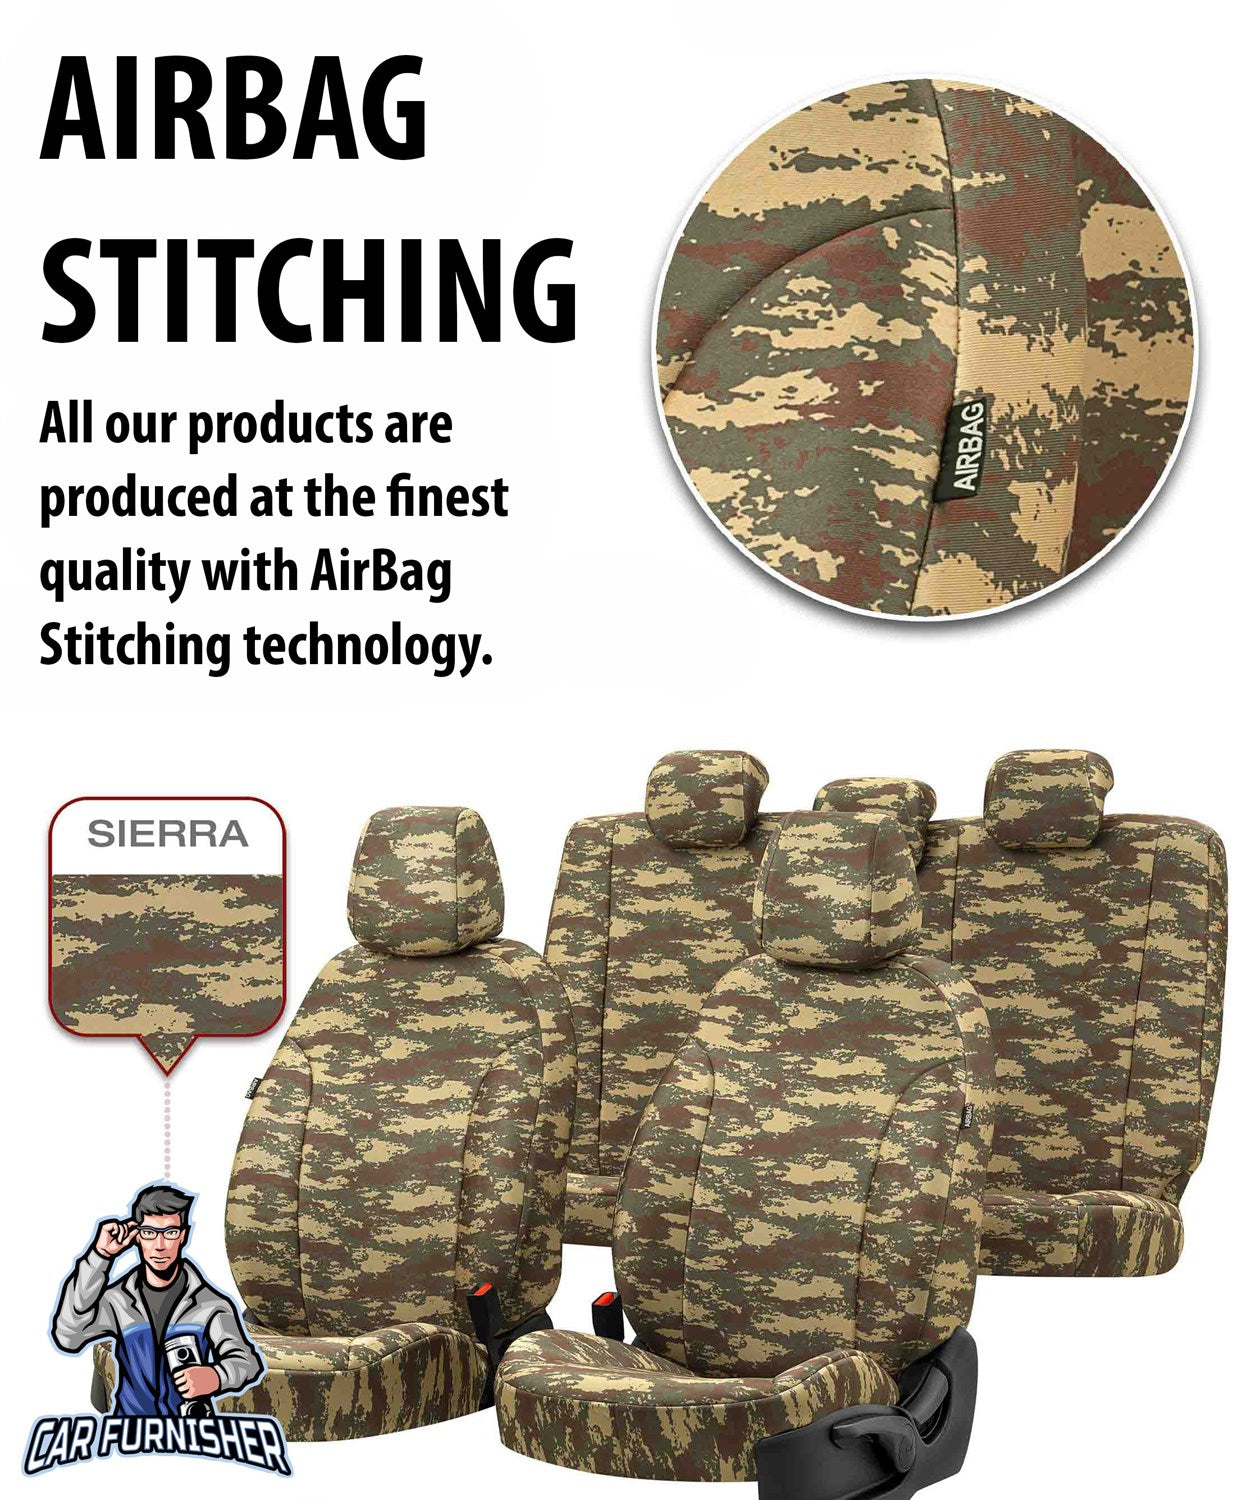 Seat Alhambra Seat Covers Camouflage Waterproof Design Everest Camo Waterproof Fabric